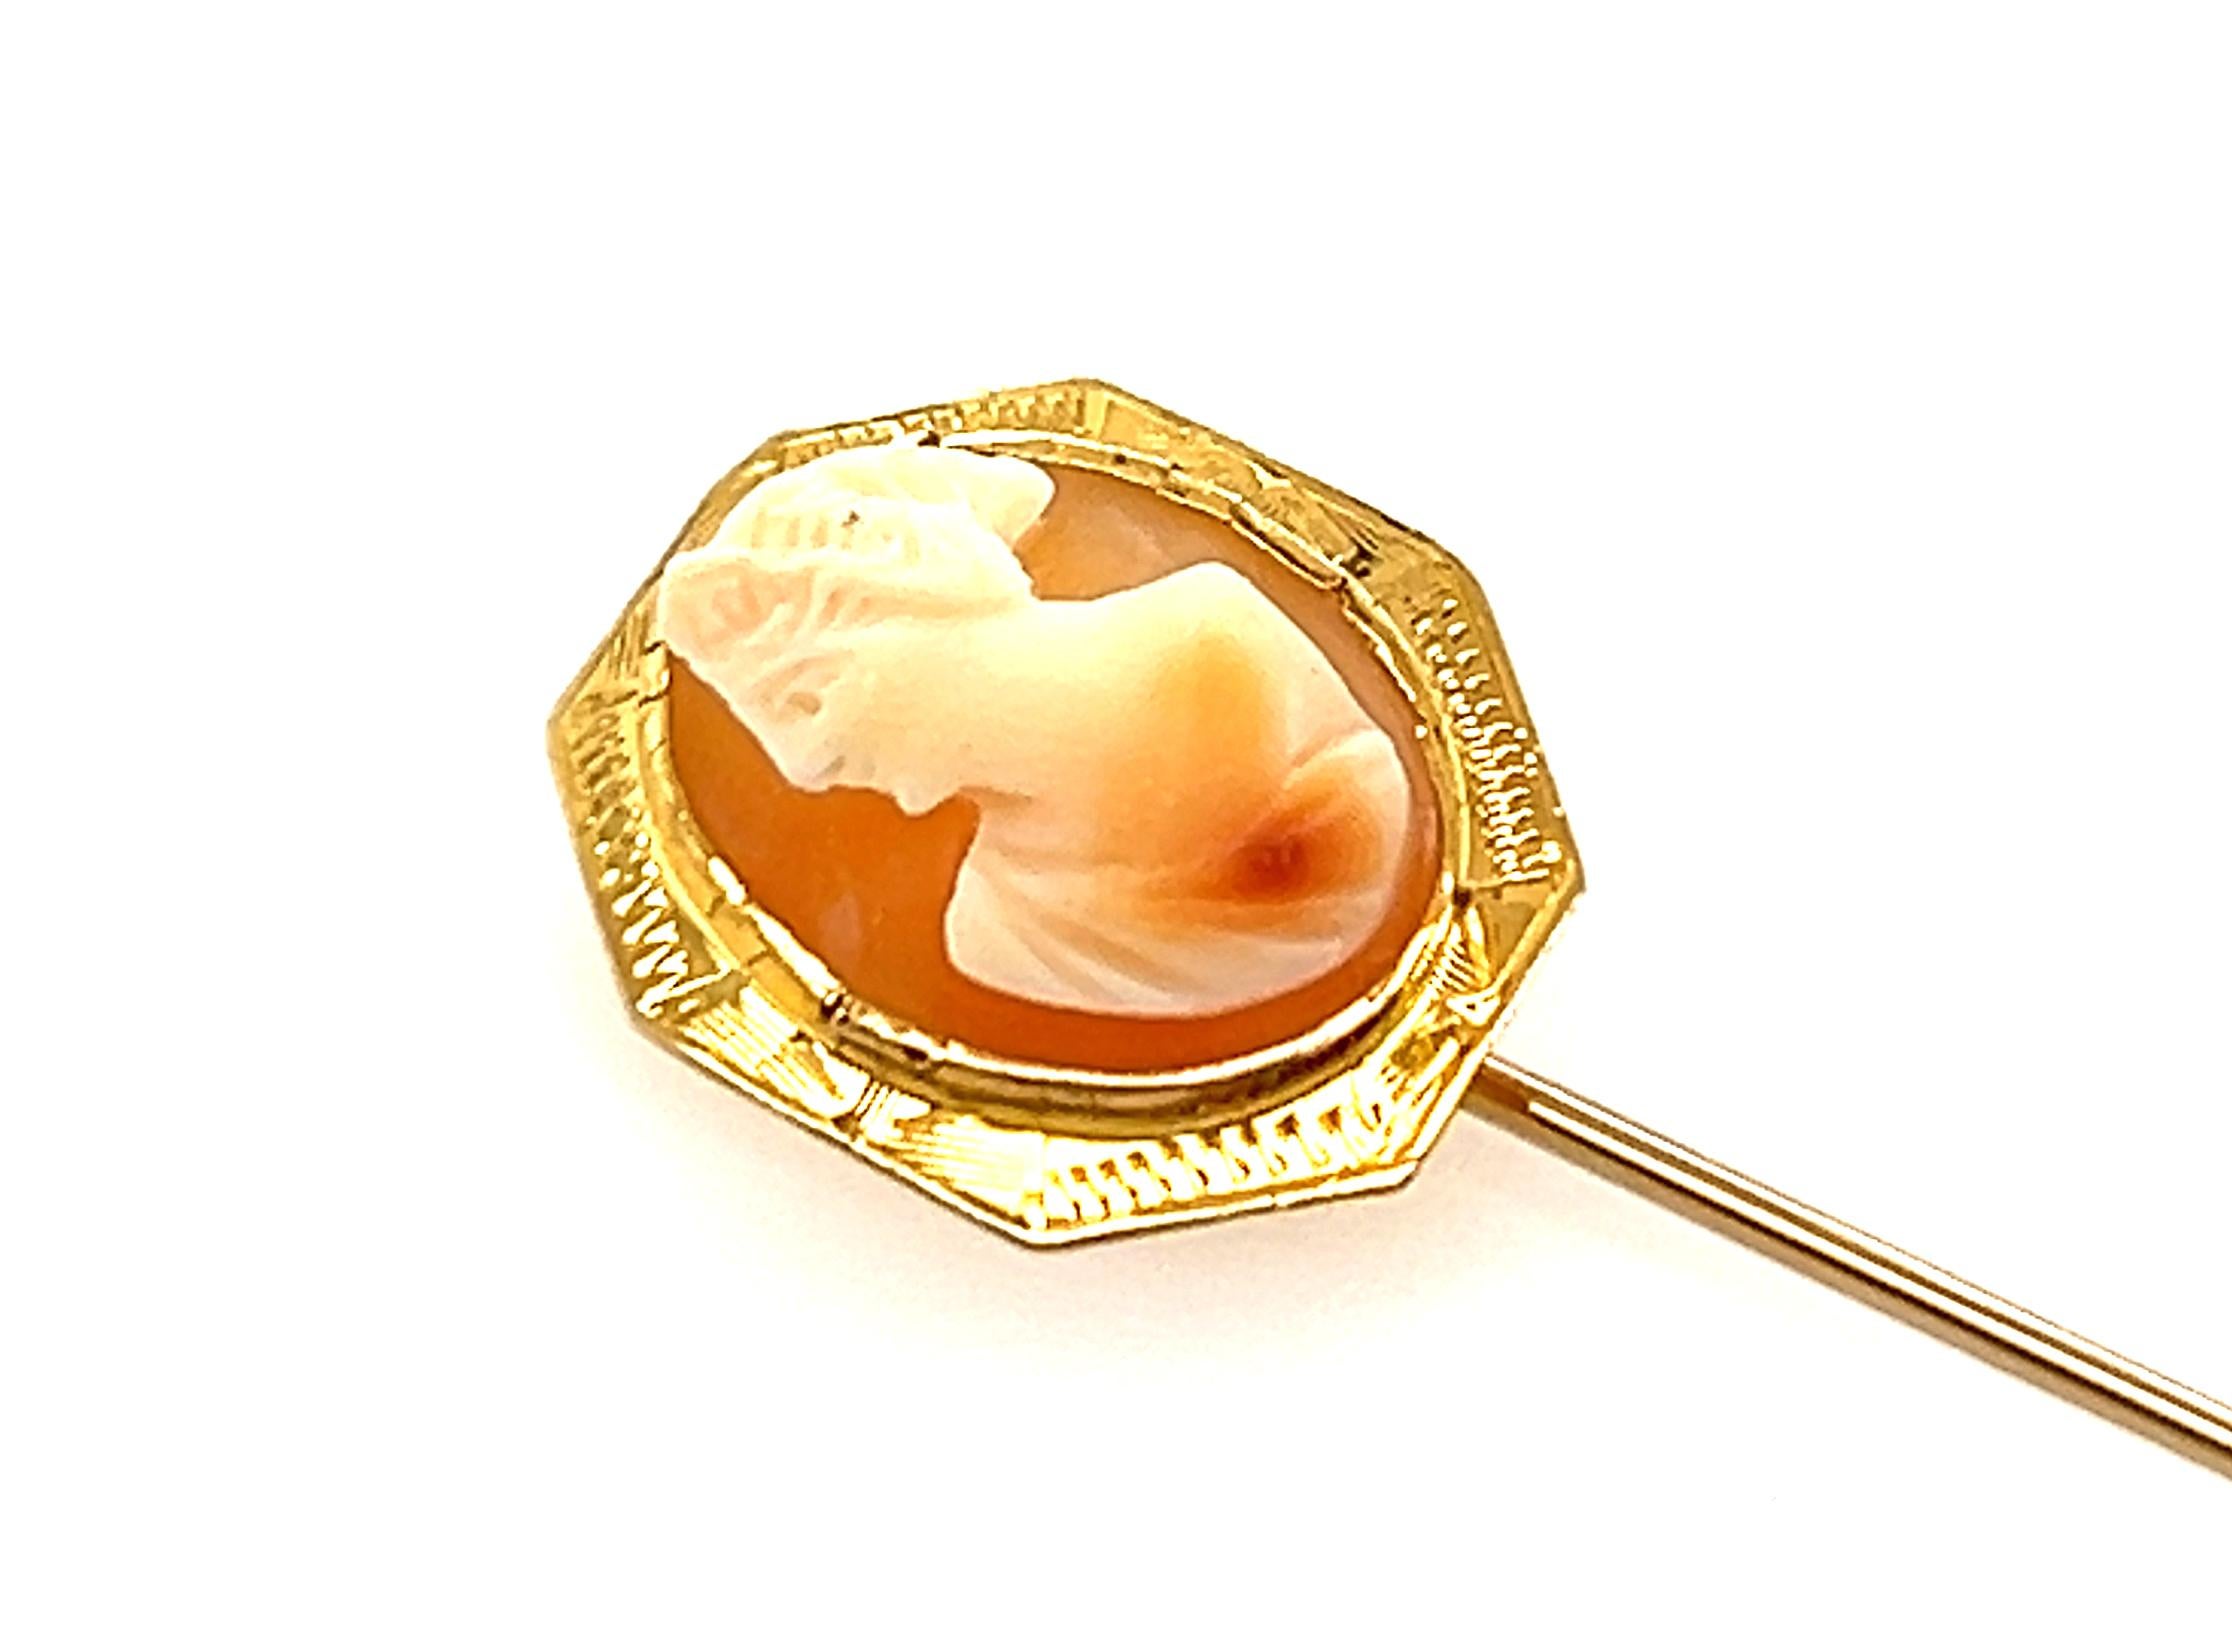 Genuine Original Antique from 1940's Art Deco Cameo 14K Yellow Gold Stick Pin/Brooch


Featuring an Exquisitely Hand Carved  Antique Cameo 

Absolutely Spectacular Hand Carved Details

Solid 14K Yellow Gold Pin

Circa 1940's

The Art Deco Era in